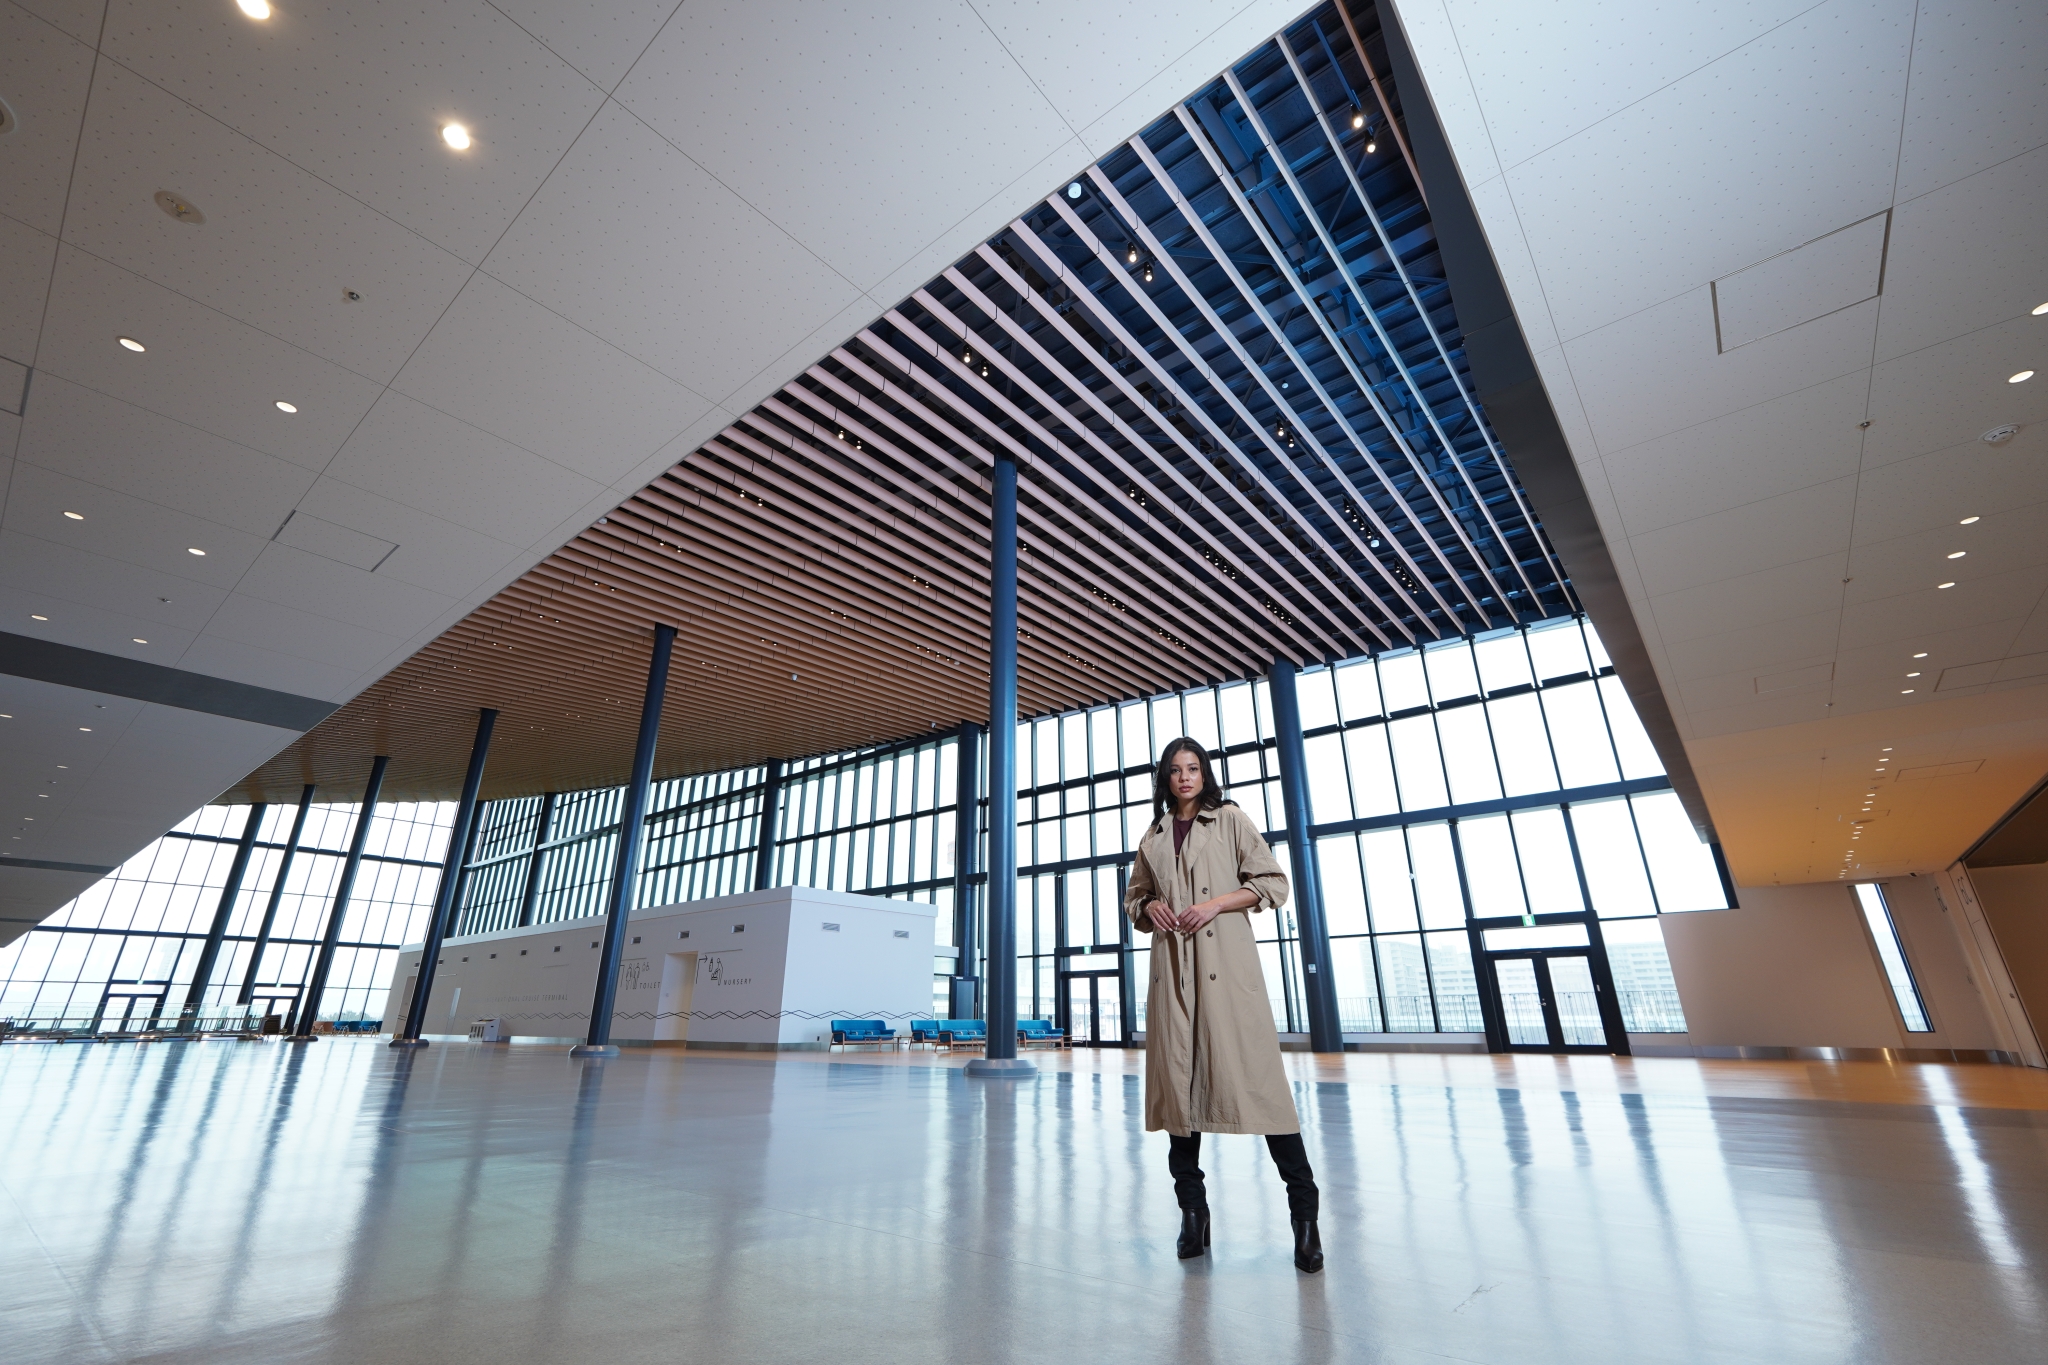 Female model in a large atrium with glass walls